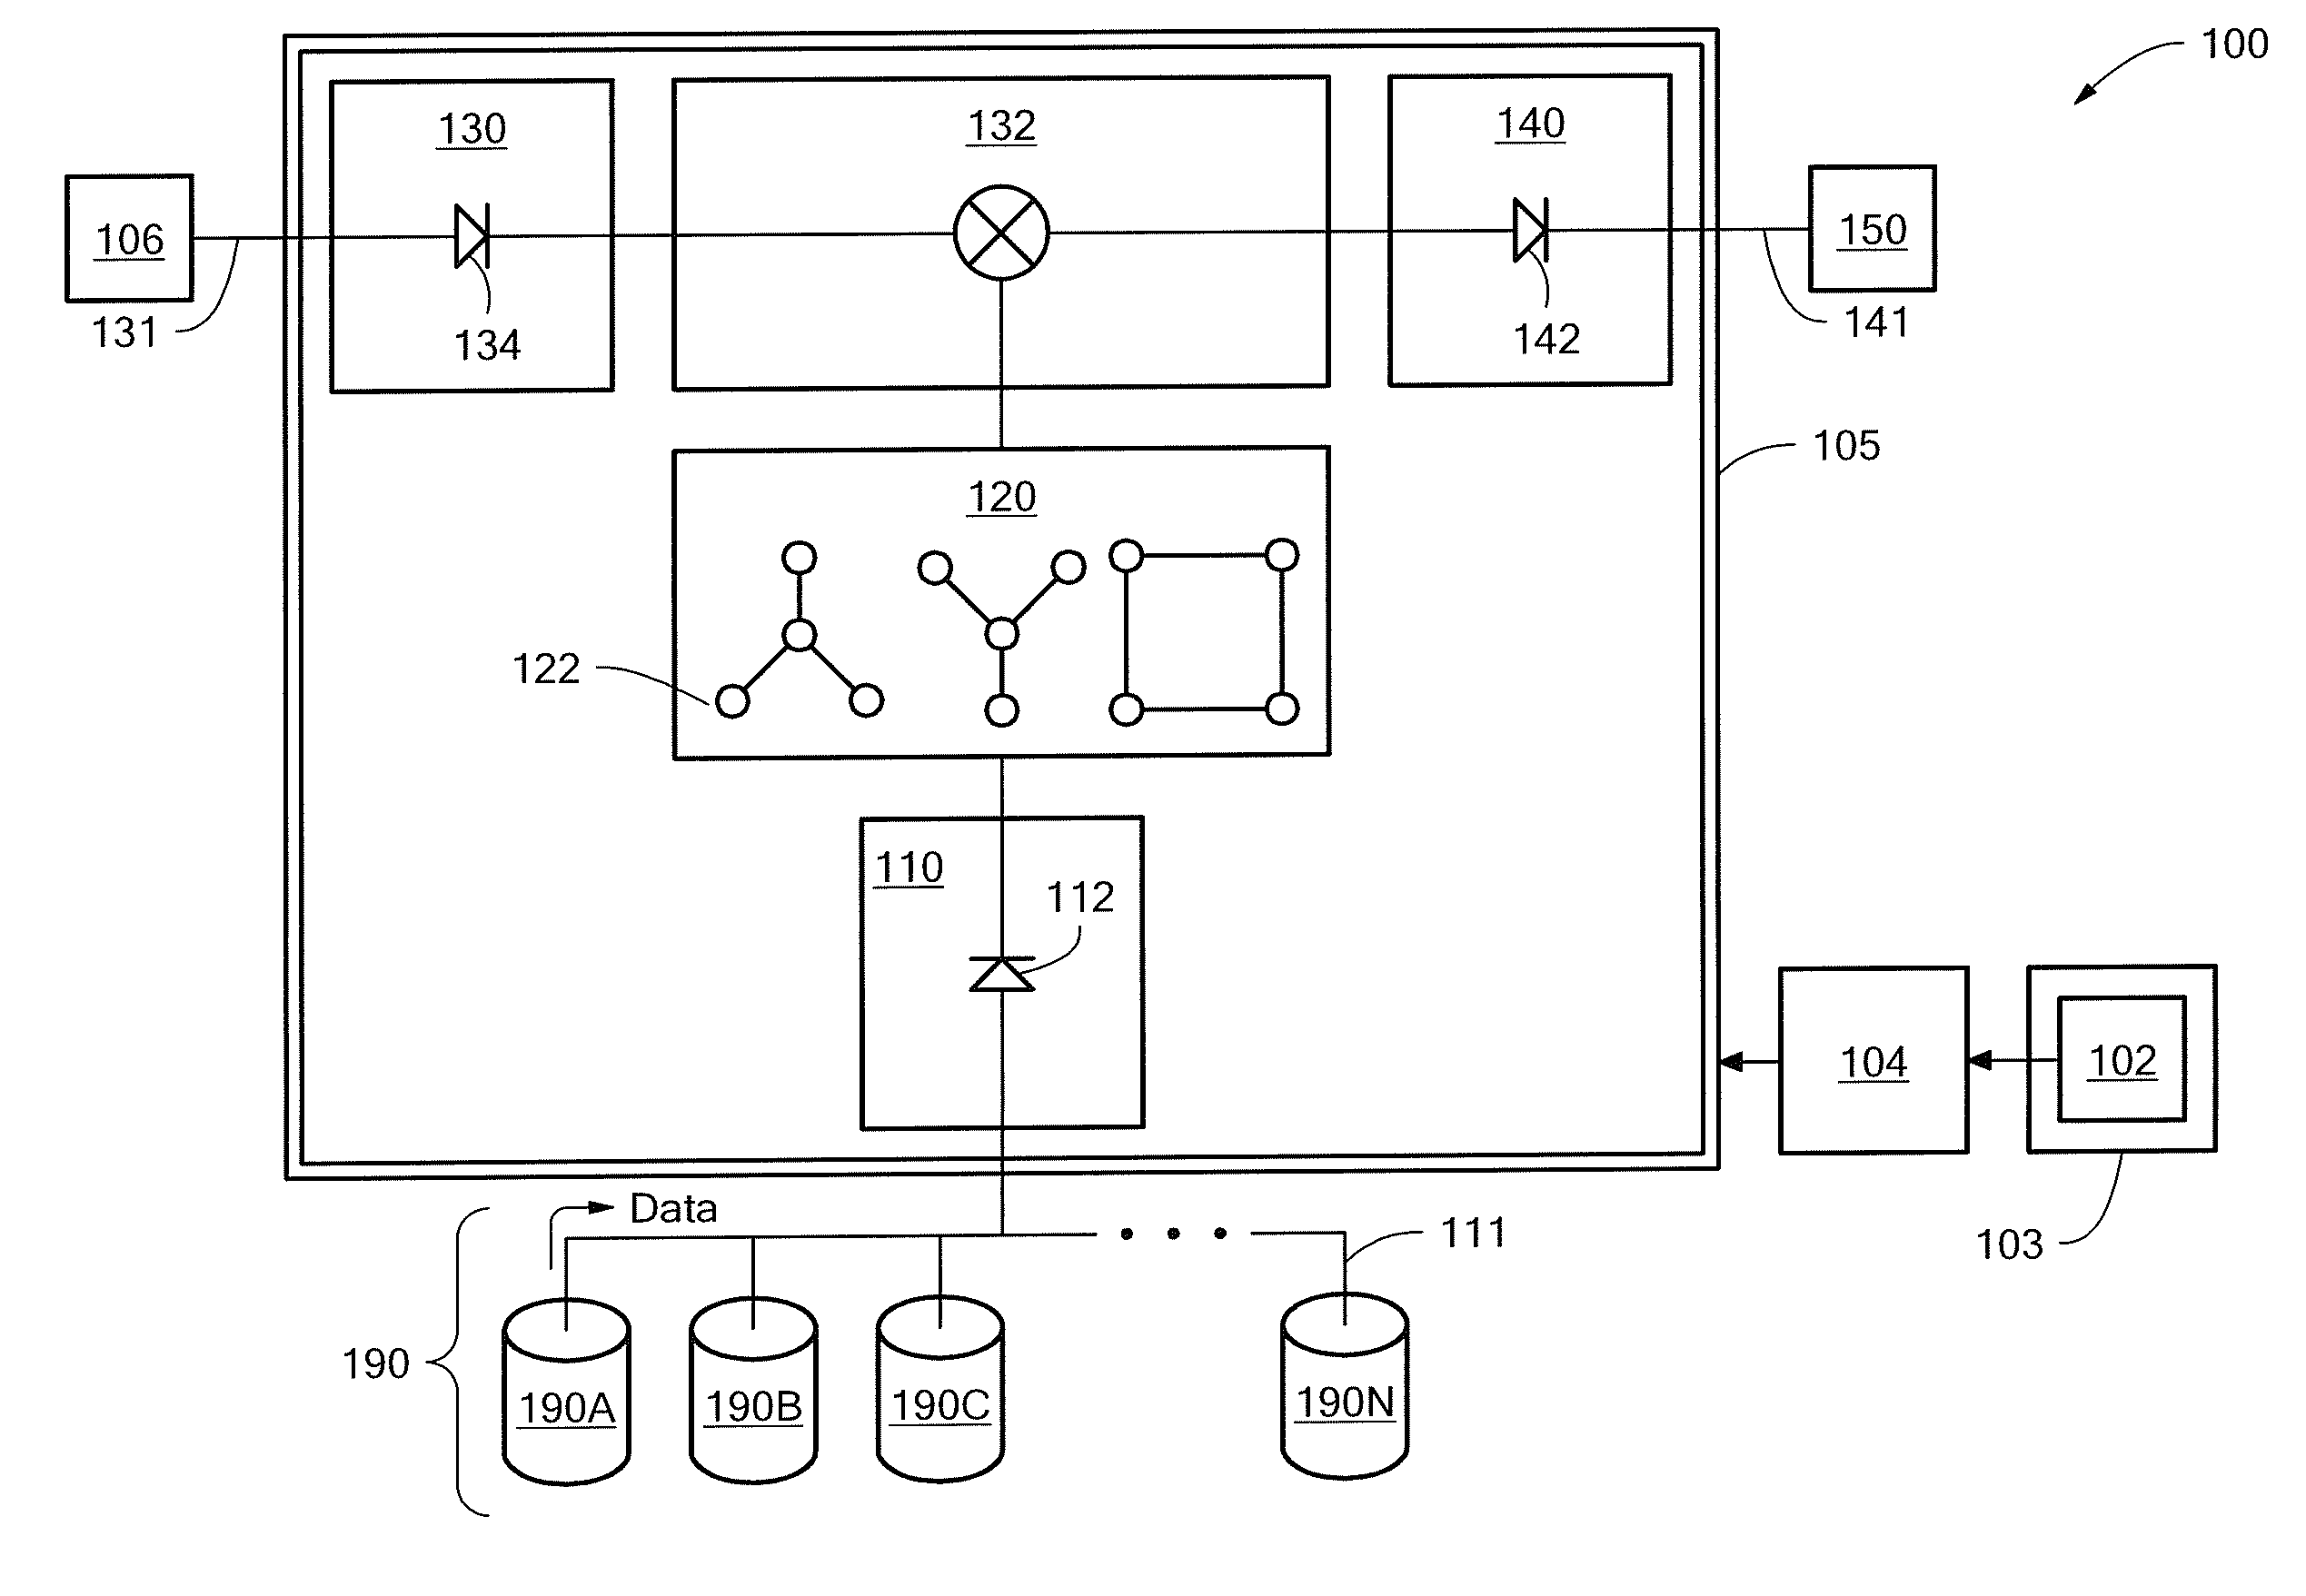 Apparatus and method for information sharing and privacy assurance